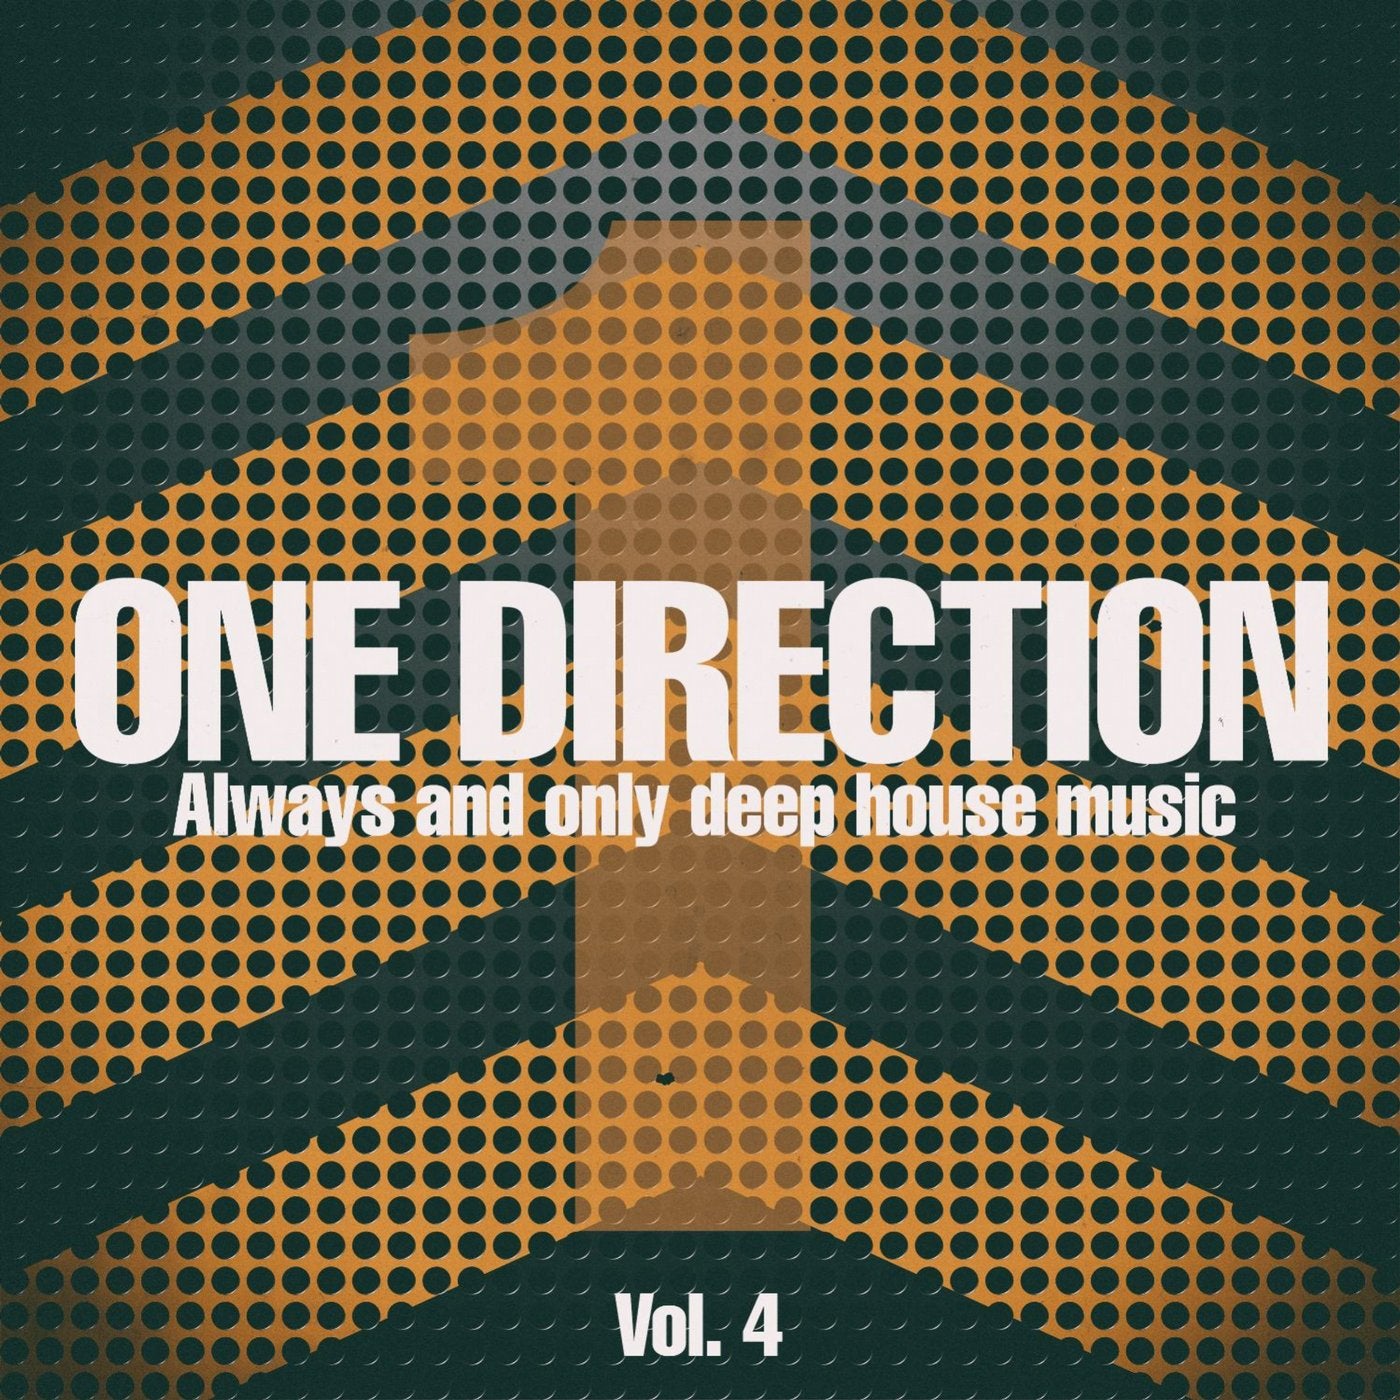 One Direction, Vol. 4 (Always and Only Deep House Music)